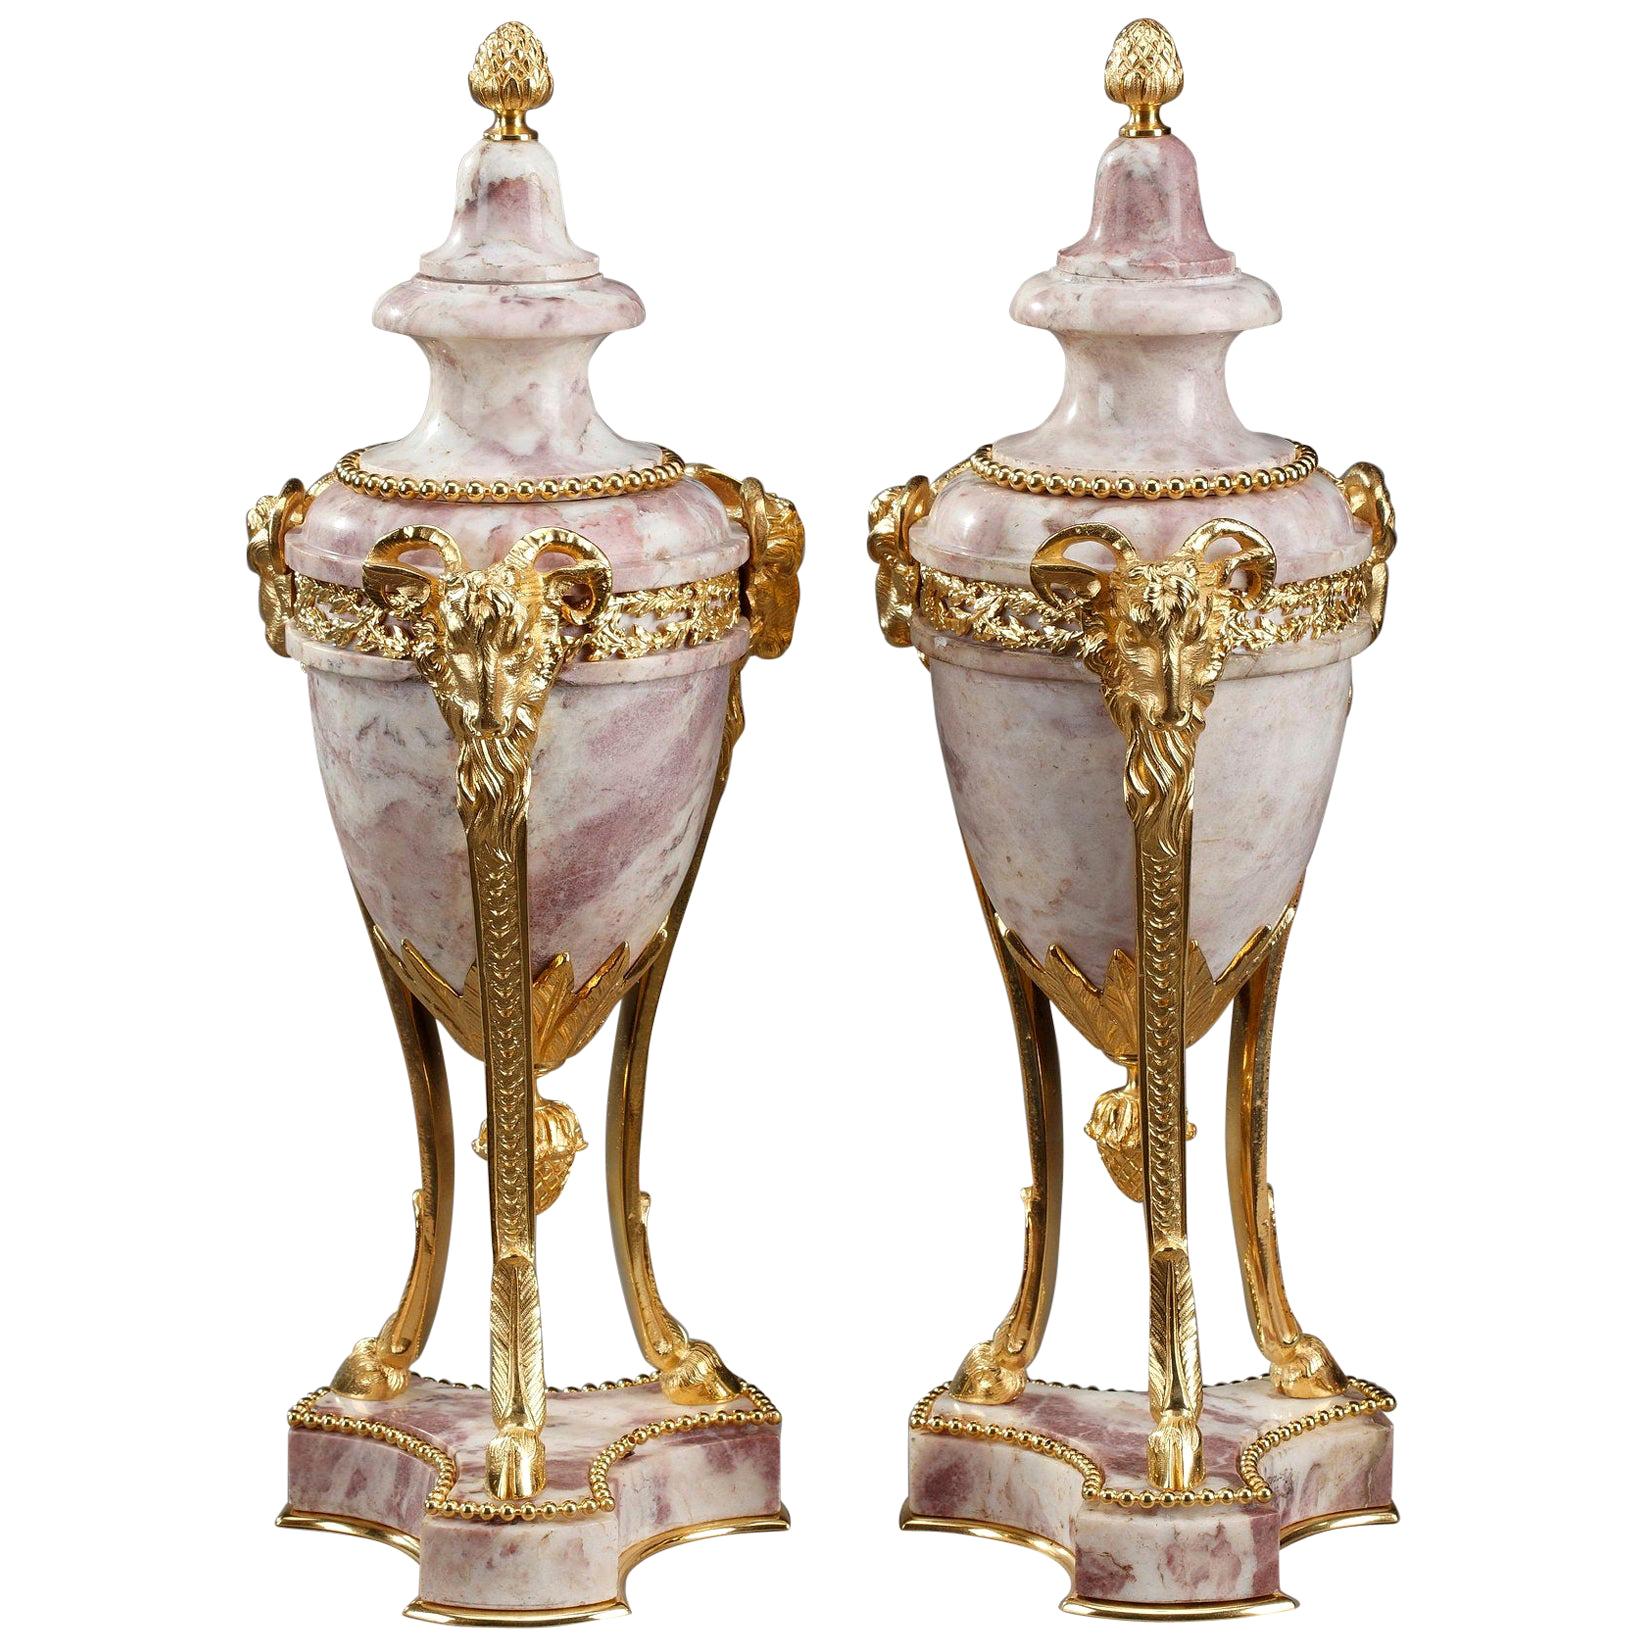 19th Century Large Pair of Covered Urns in Louis XVI Style